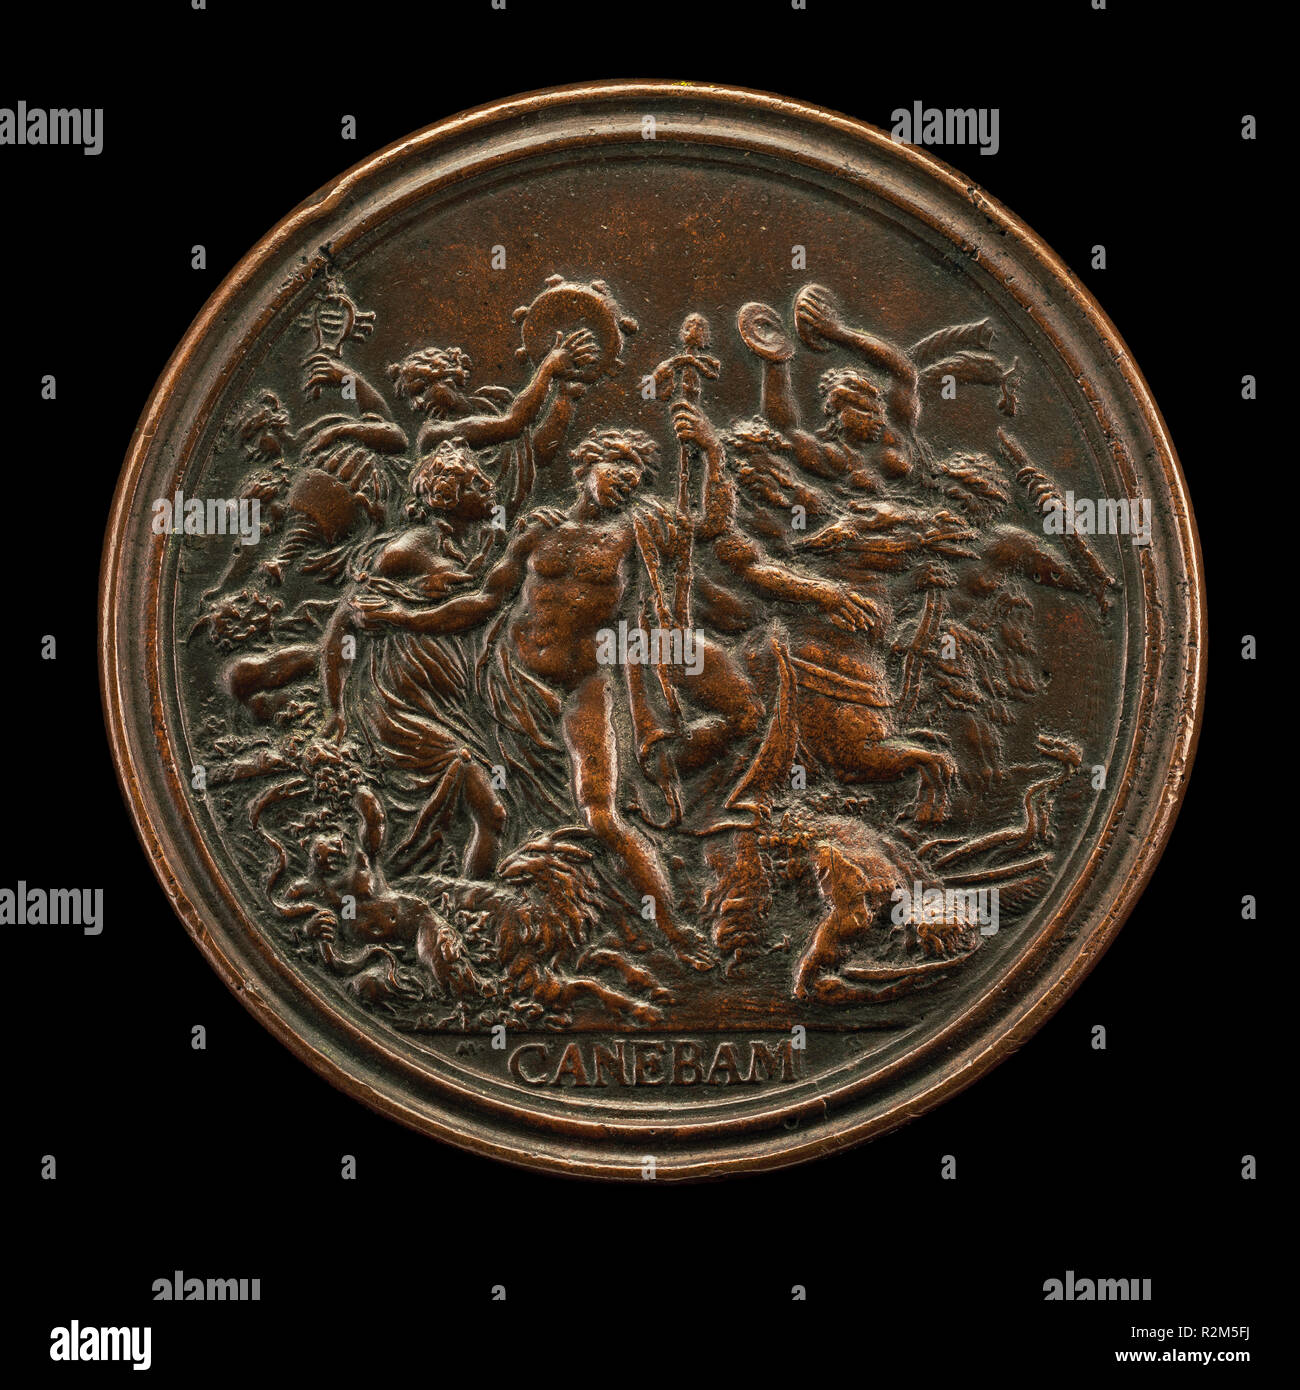 Bacchanal [reverse]. Dated: 1684. Dimensions: overall (diameter): 8.76 cm (3 7/16 in.)  gross weight: 183.37 gr (0.404 lb.)  axis: 12:00. Medium: bronze. Museum: National Gallery of Art, Washington DC. Author: Massimiliano Soldani Benzi. Stock Photo